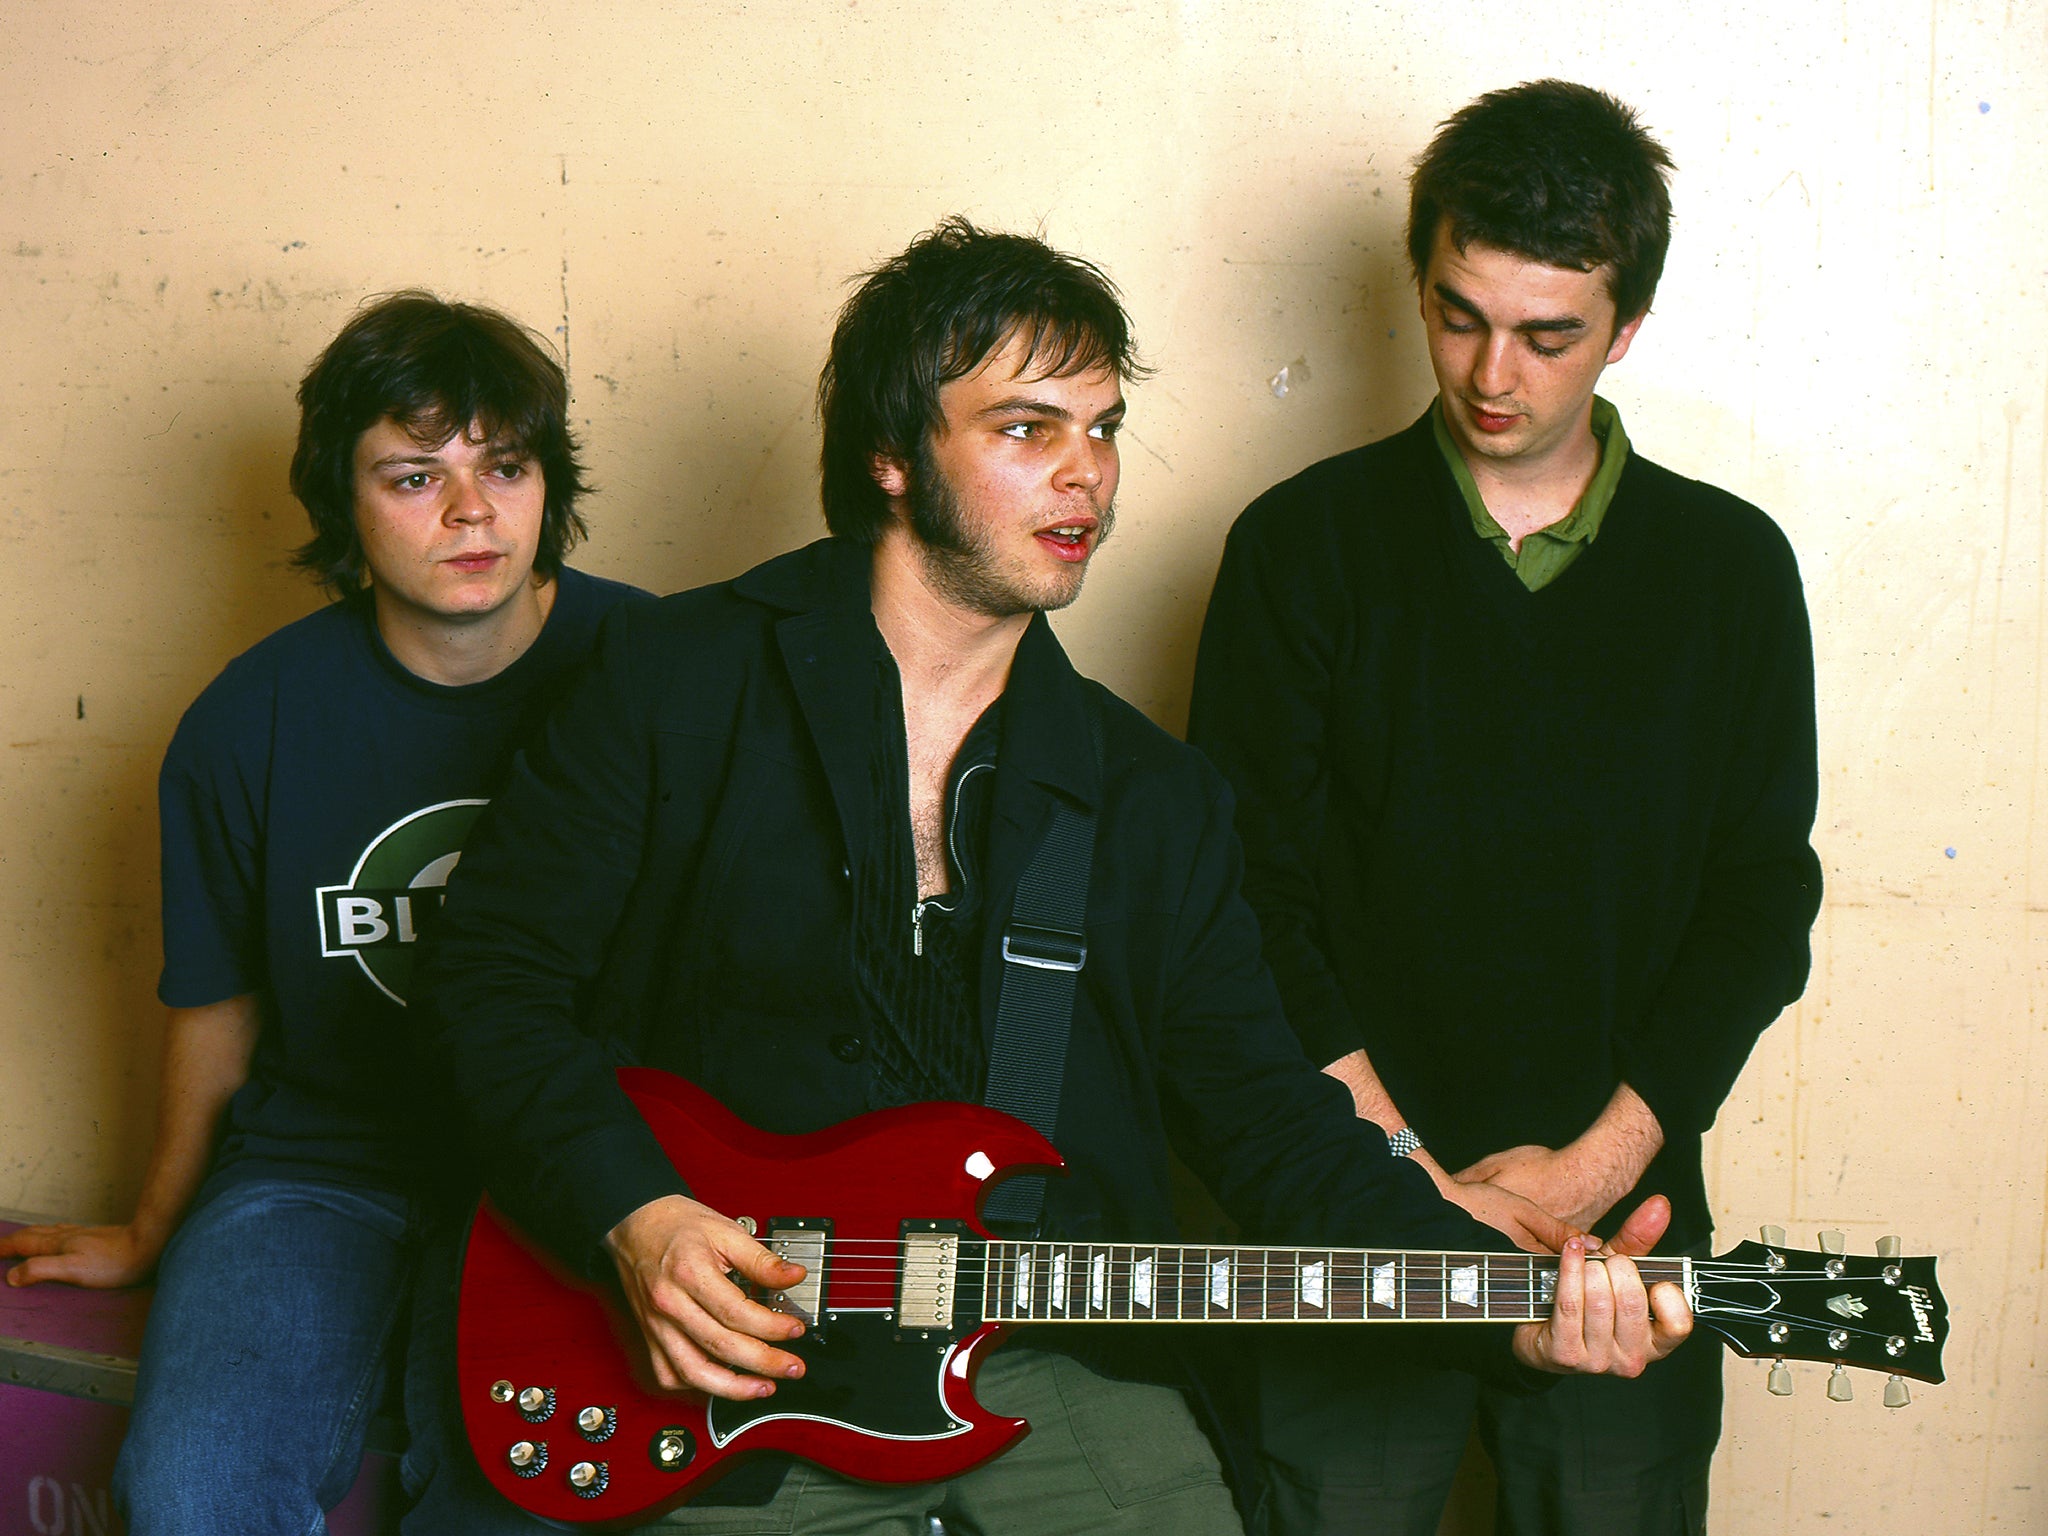 Mick Quinn, Coombes and Danny Goffey in Supergrass in the mid 1990s